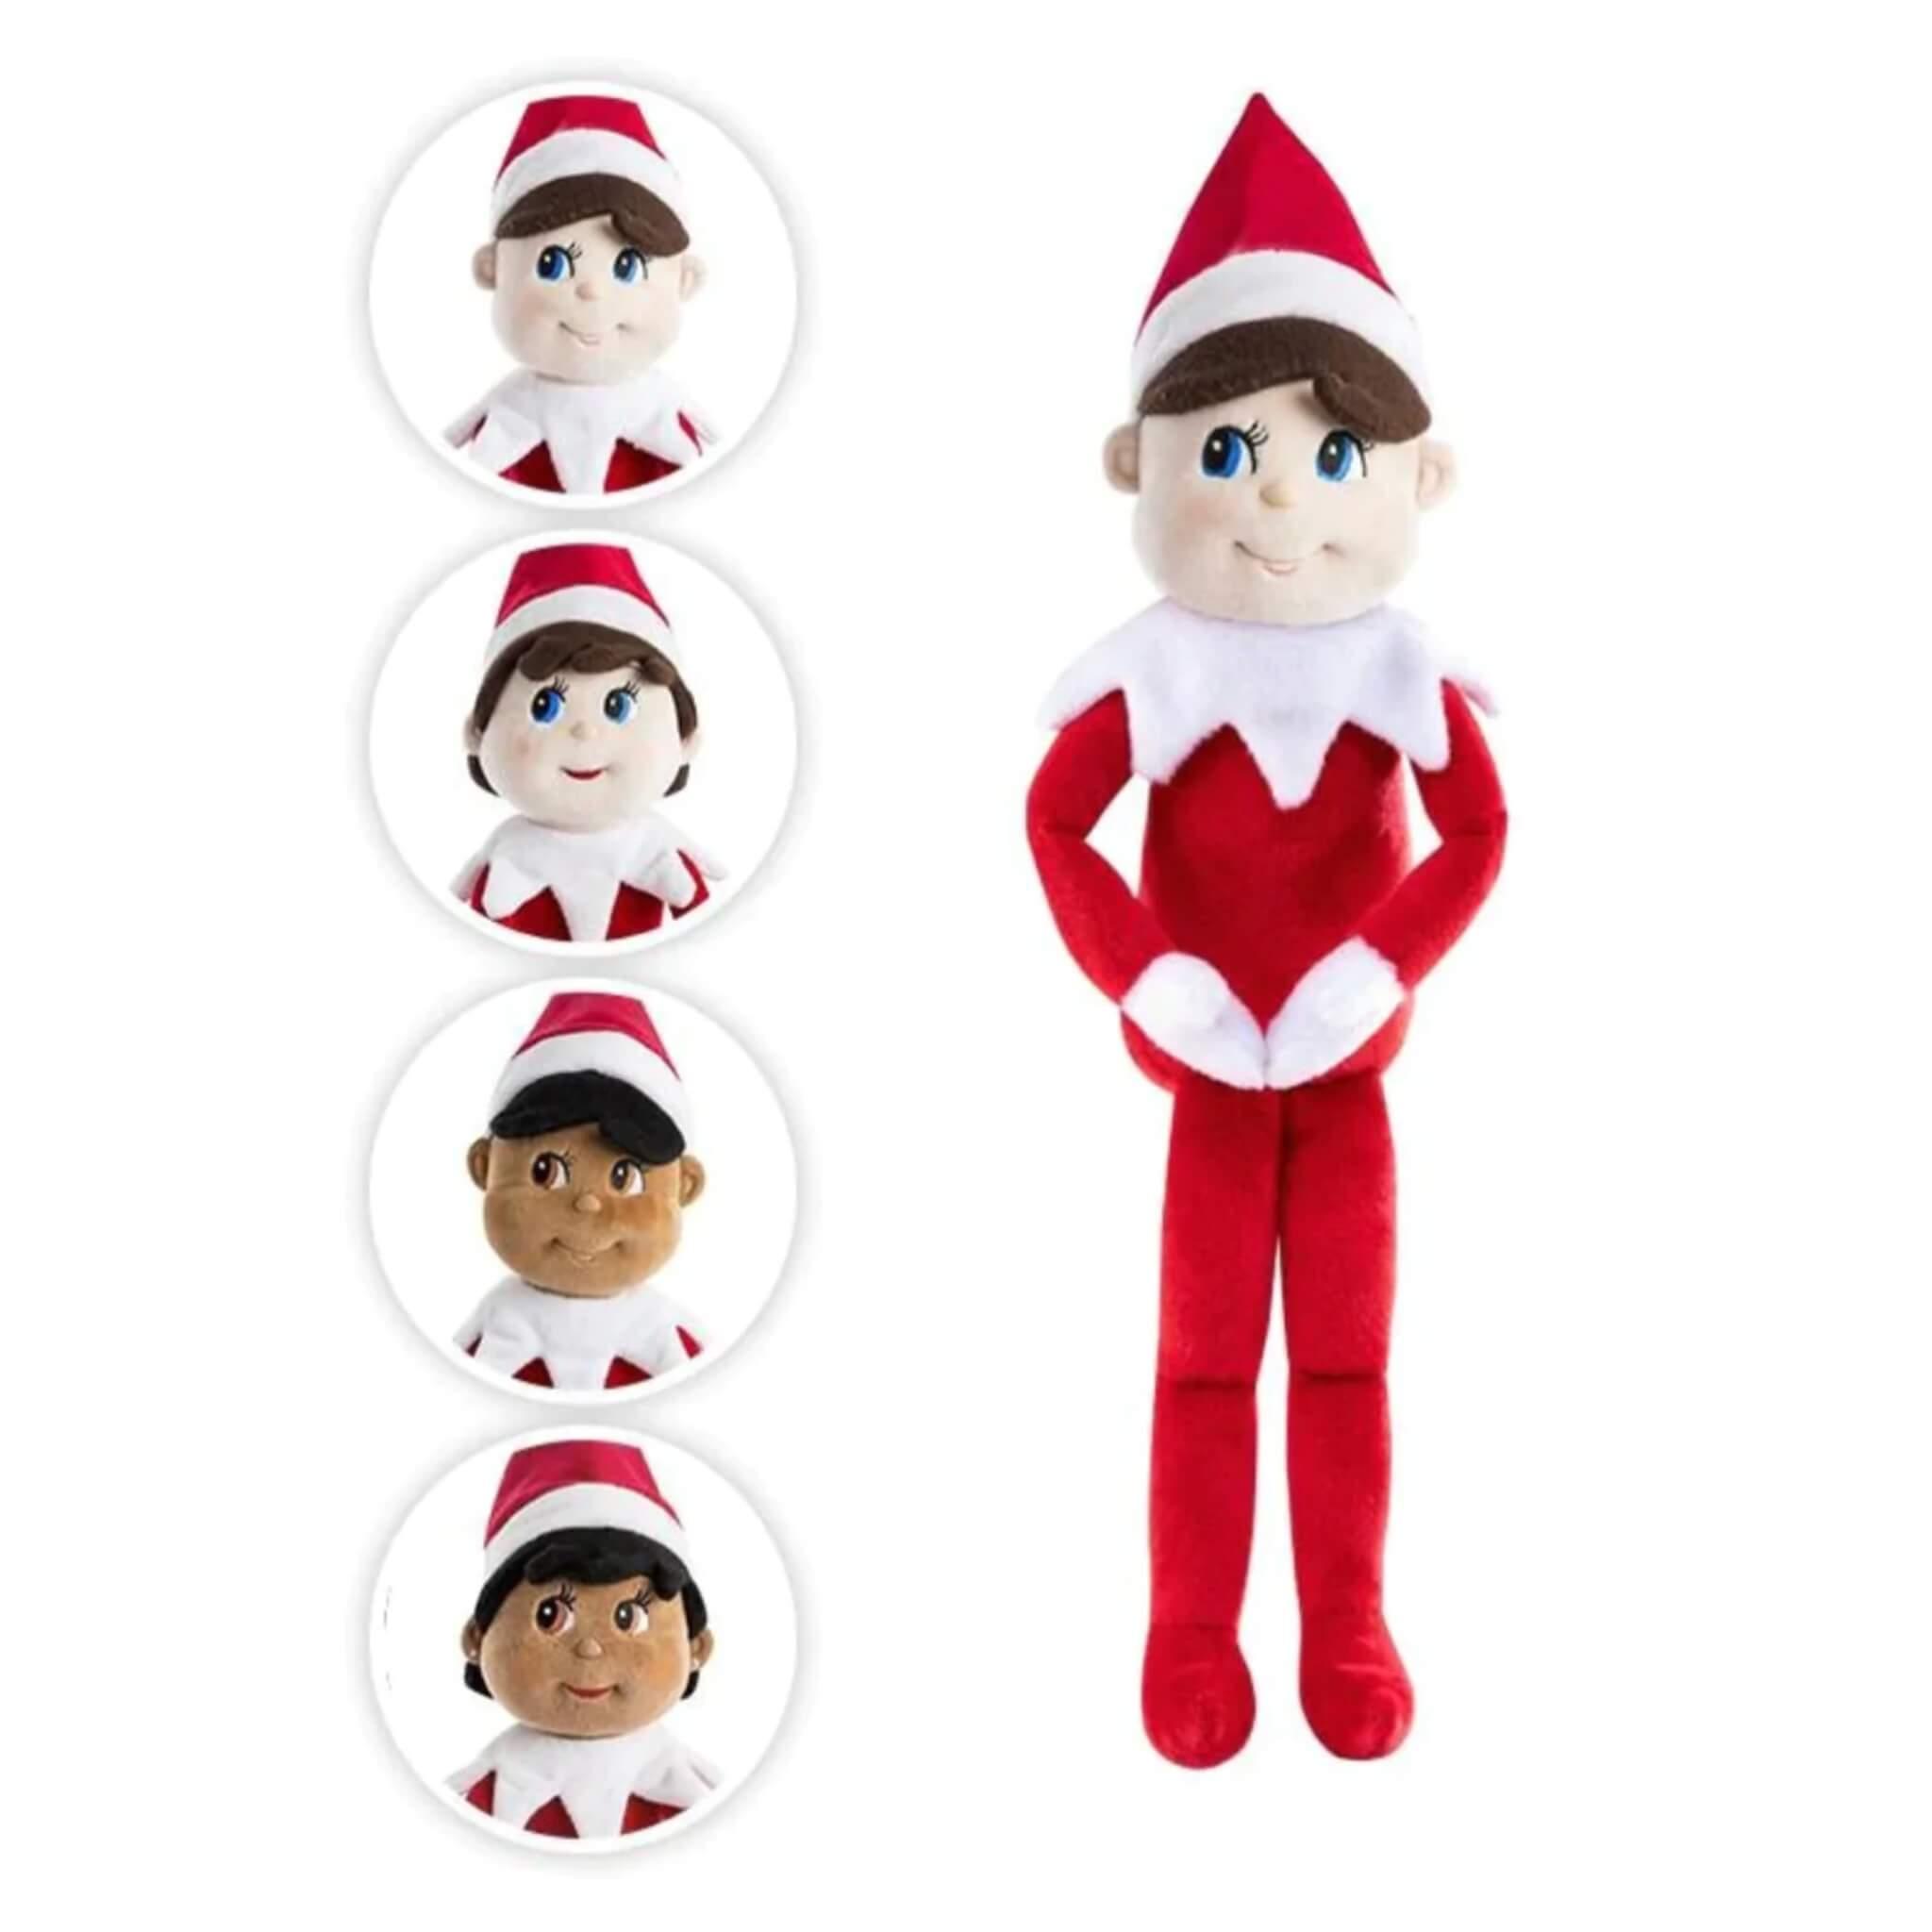 Elf On The Shelf Plushee Pals Boy and Girl Toy Elves - The Elf on The Shelf